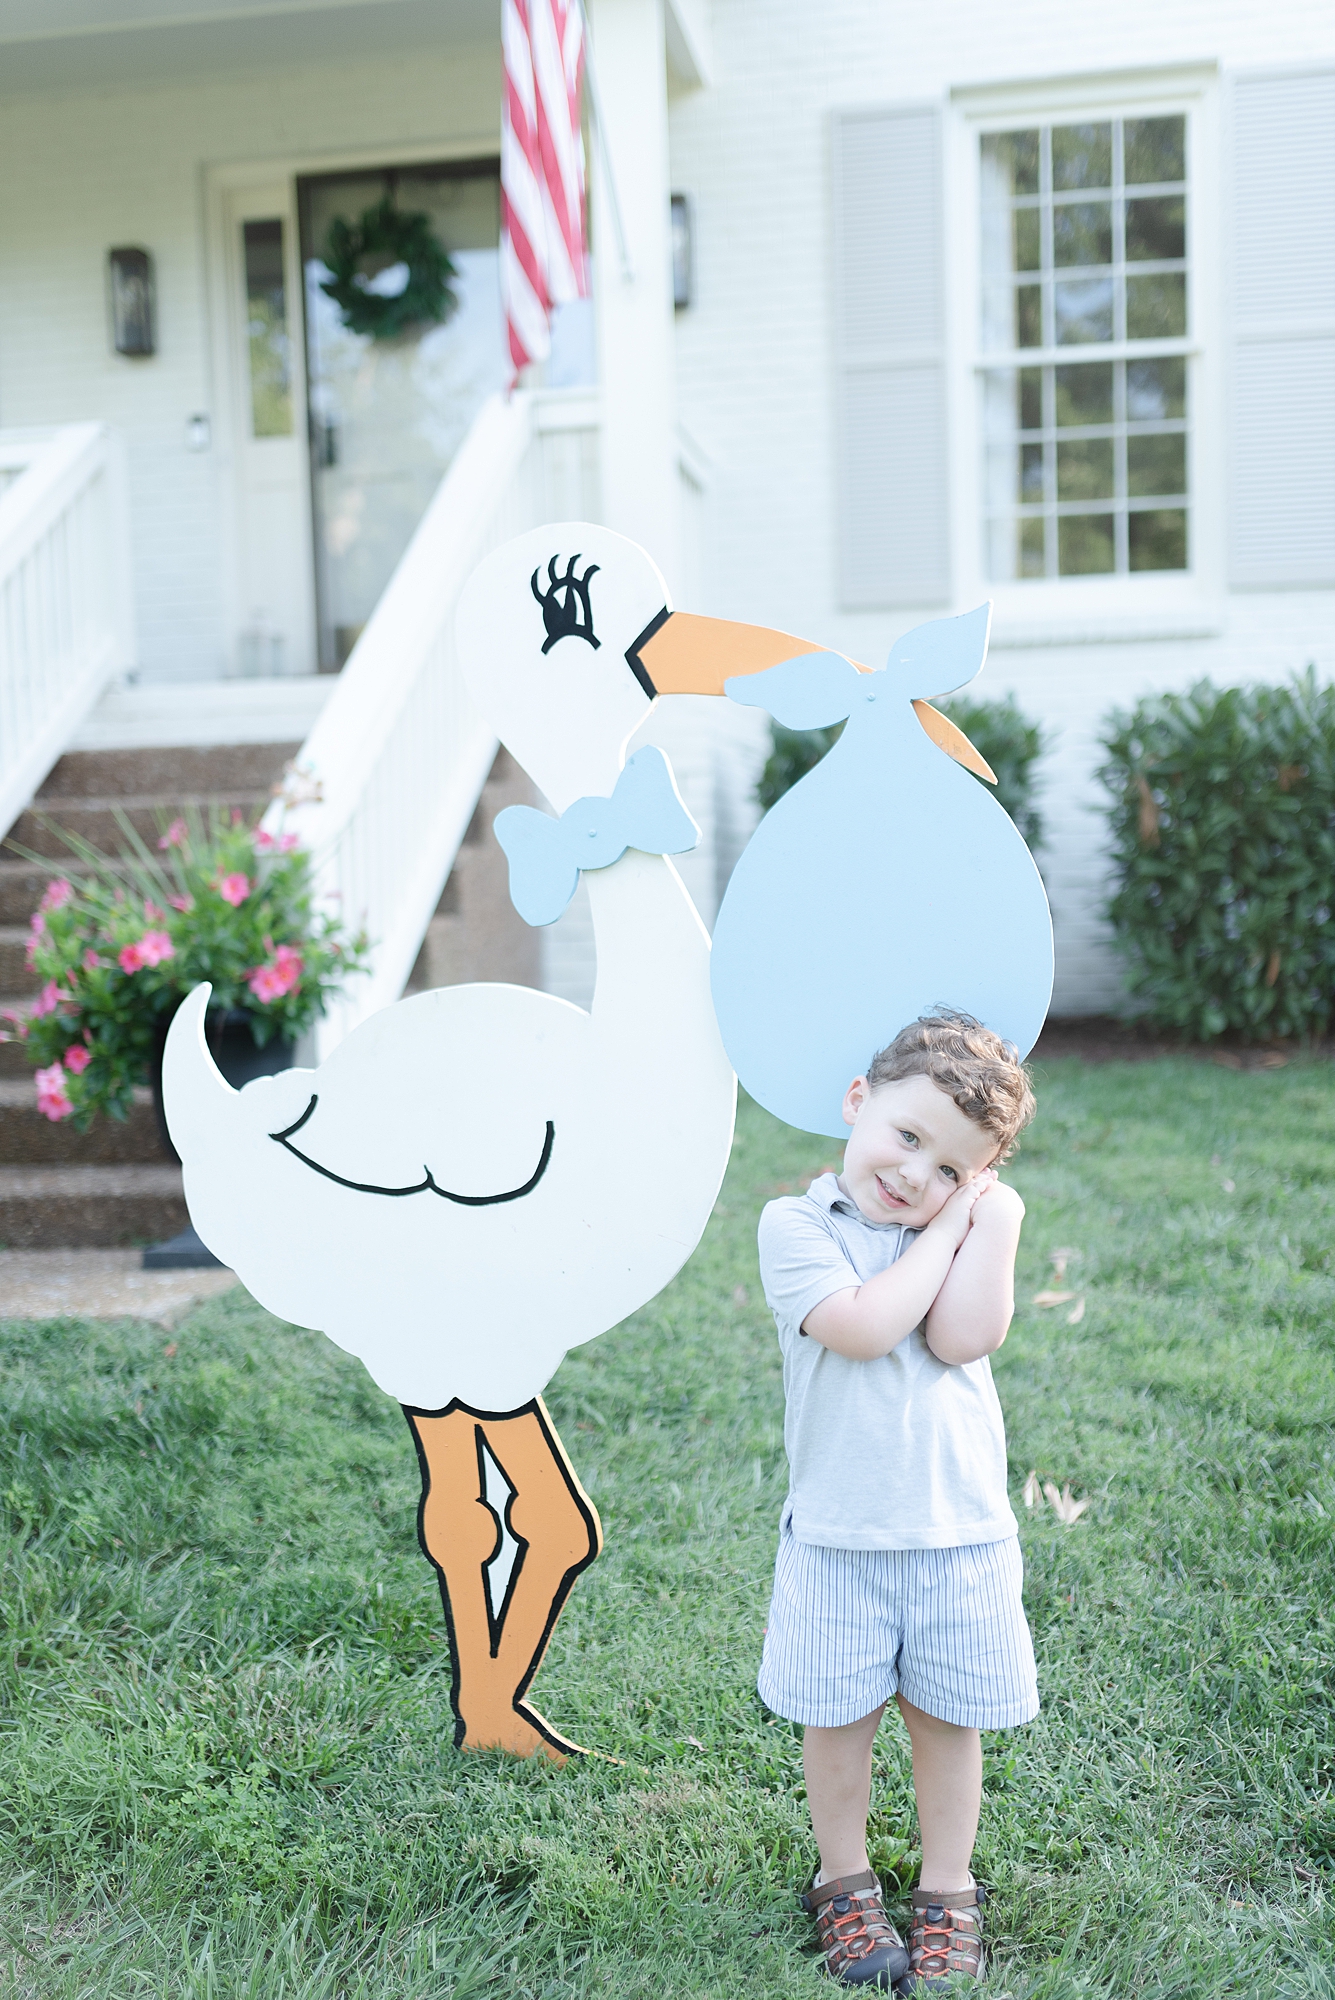 Older brother is standing in front of a stork which is in the front yard of his house in Brentwood TN